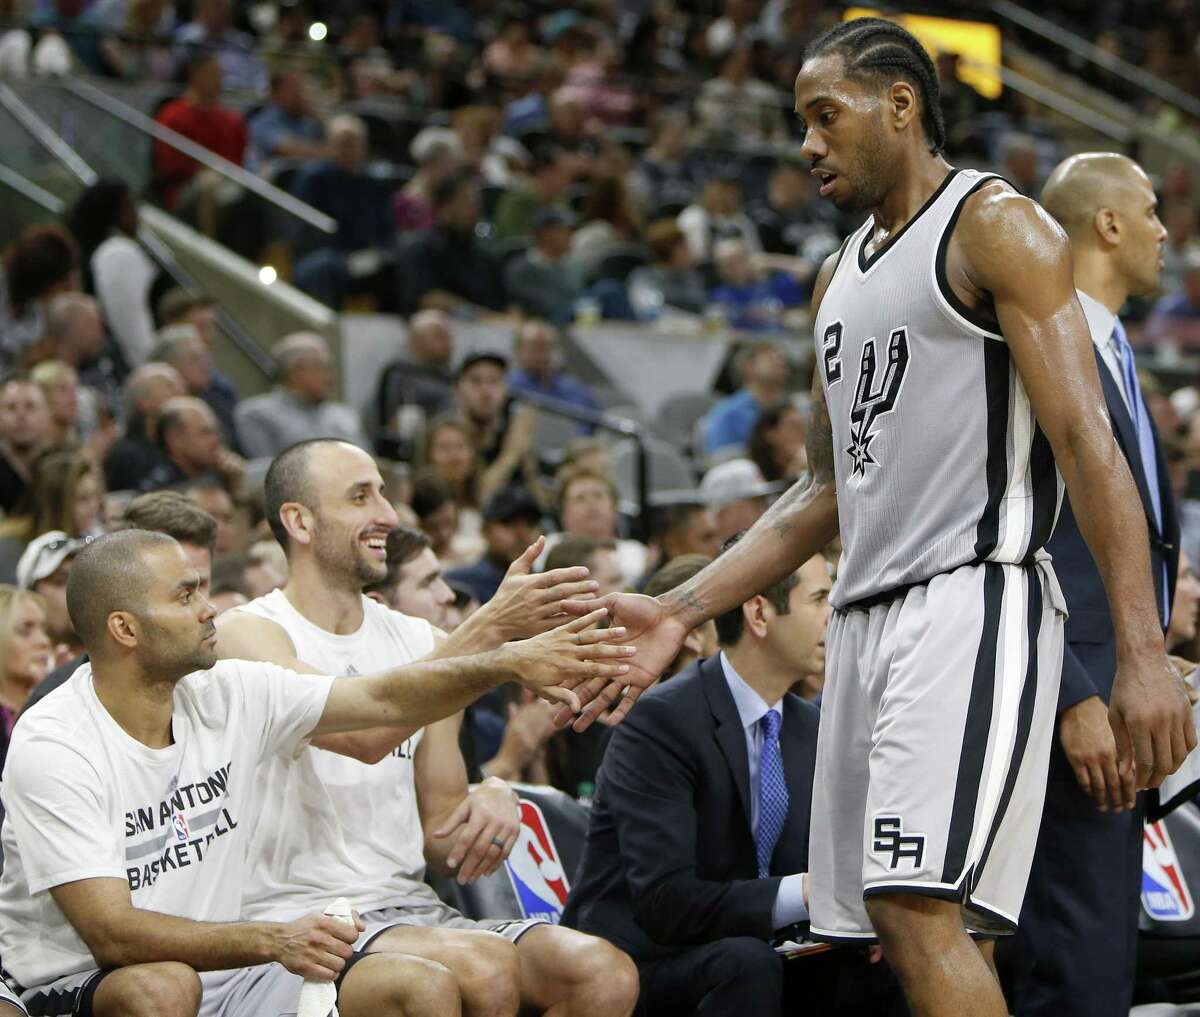 San Antonio Spurs' Tony Parker (from left), and Manu Ginobili greet Kawhi Leonard as he walks to the bench during second half action against the Utah Jazz Sunday April 2, 2017 at the AT&T Center. The Spurs won 109-103.